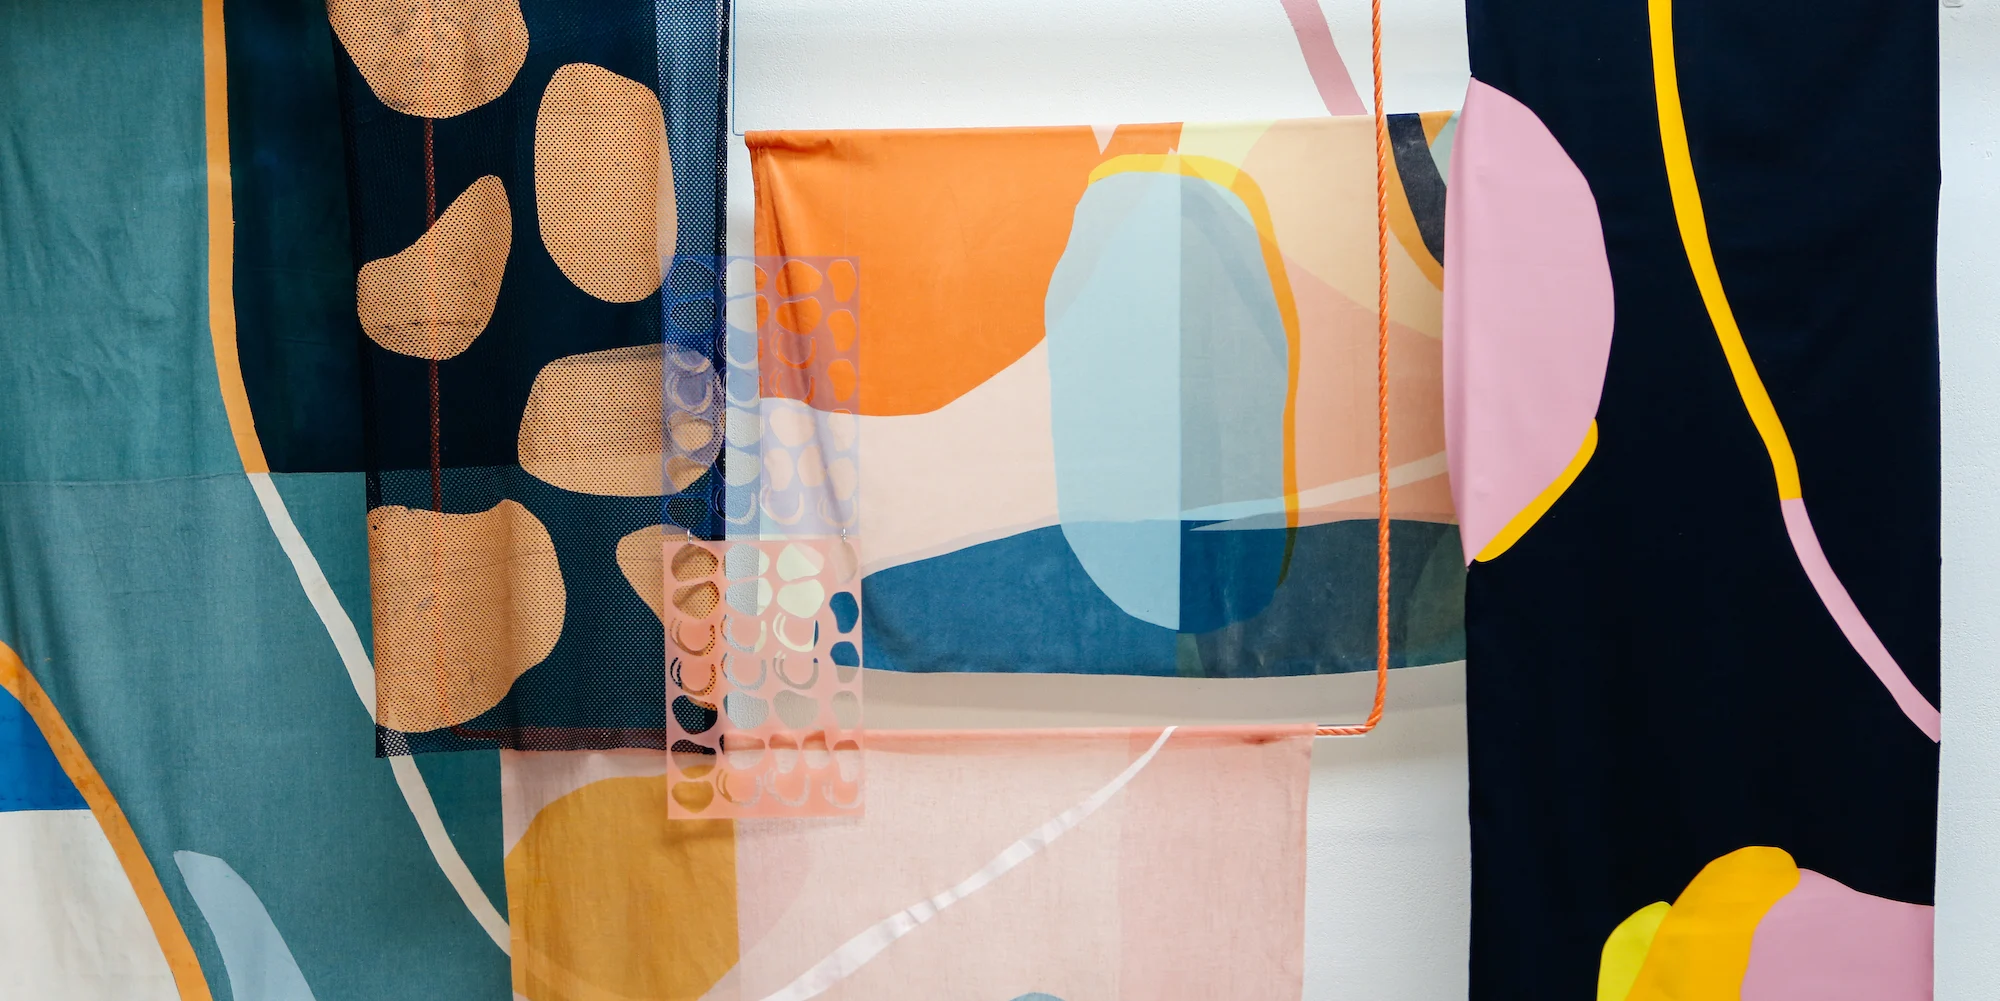 Textiles with organic shapes by Tayla-Jayne Sander, image courtesy of UAL.